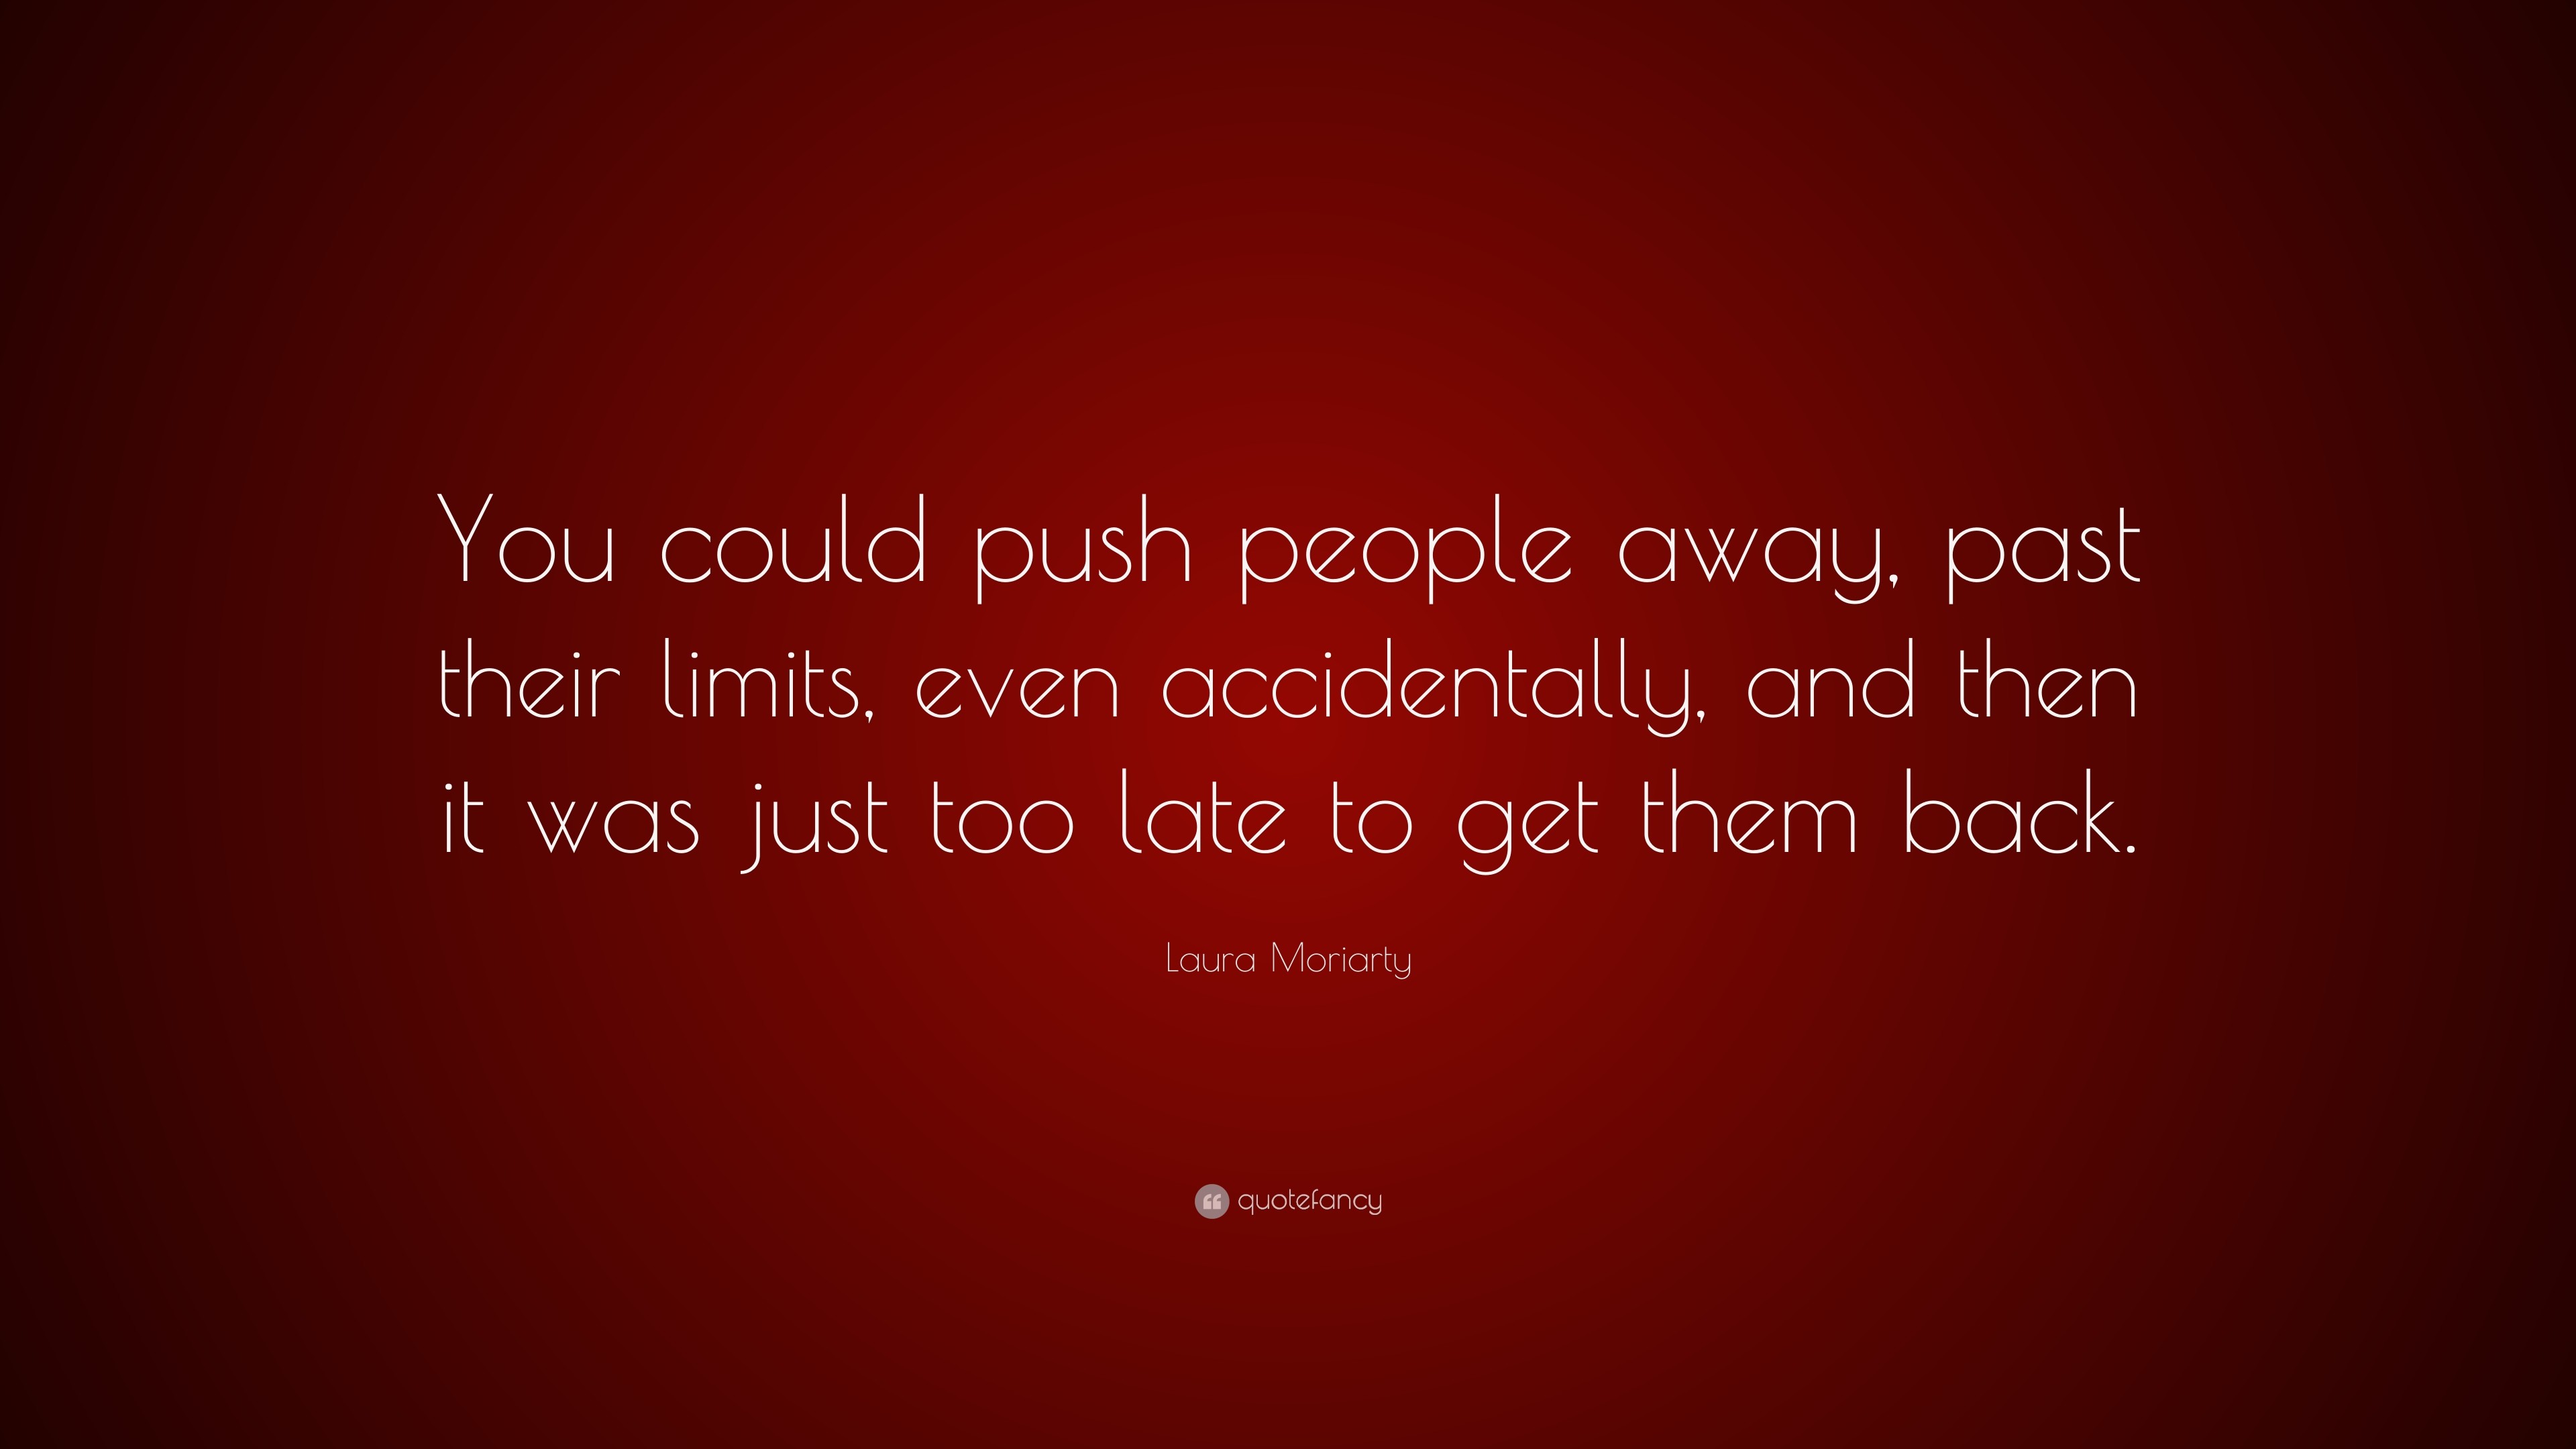 3840x2160 Laura Moriarty Quote: “You could push people away, past their limits, even